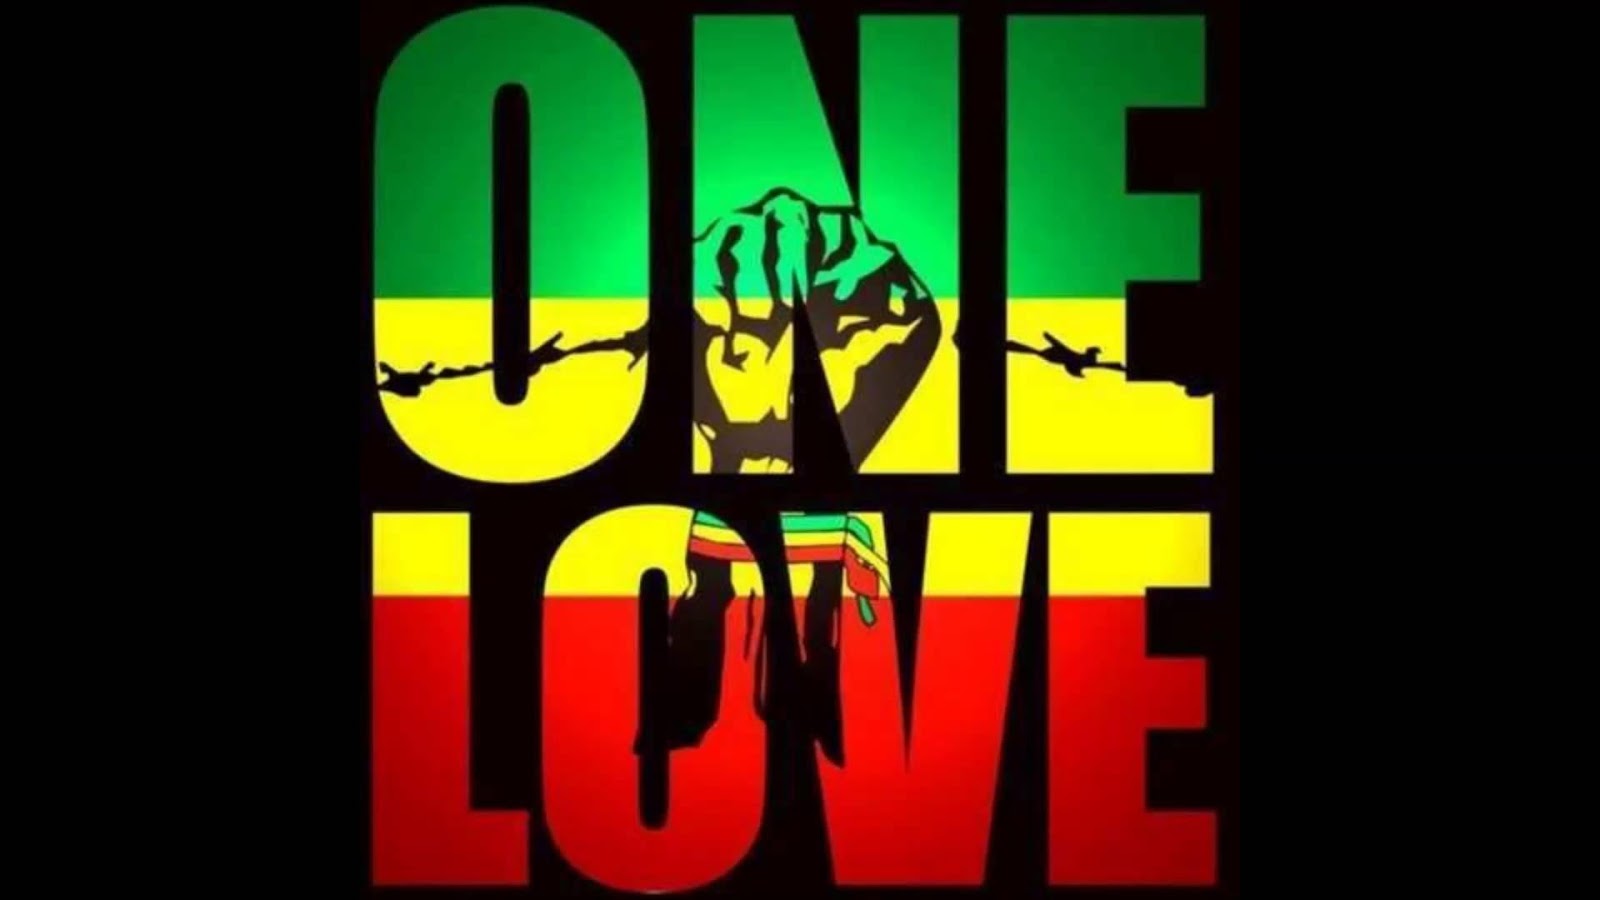 Reggae Live Wallpaper HD - Android Apps on Google Play